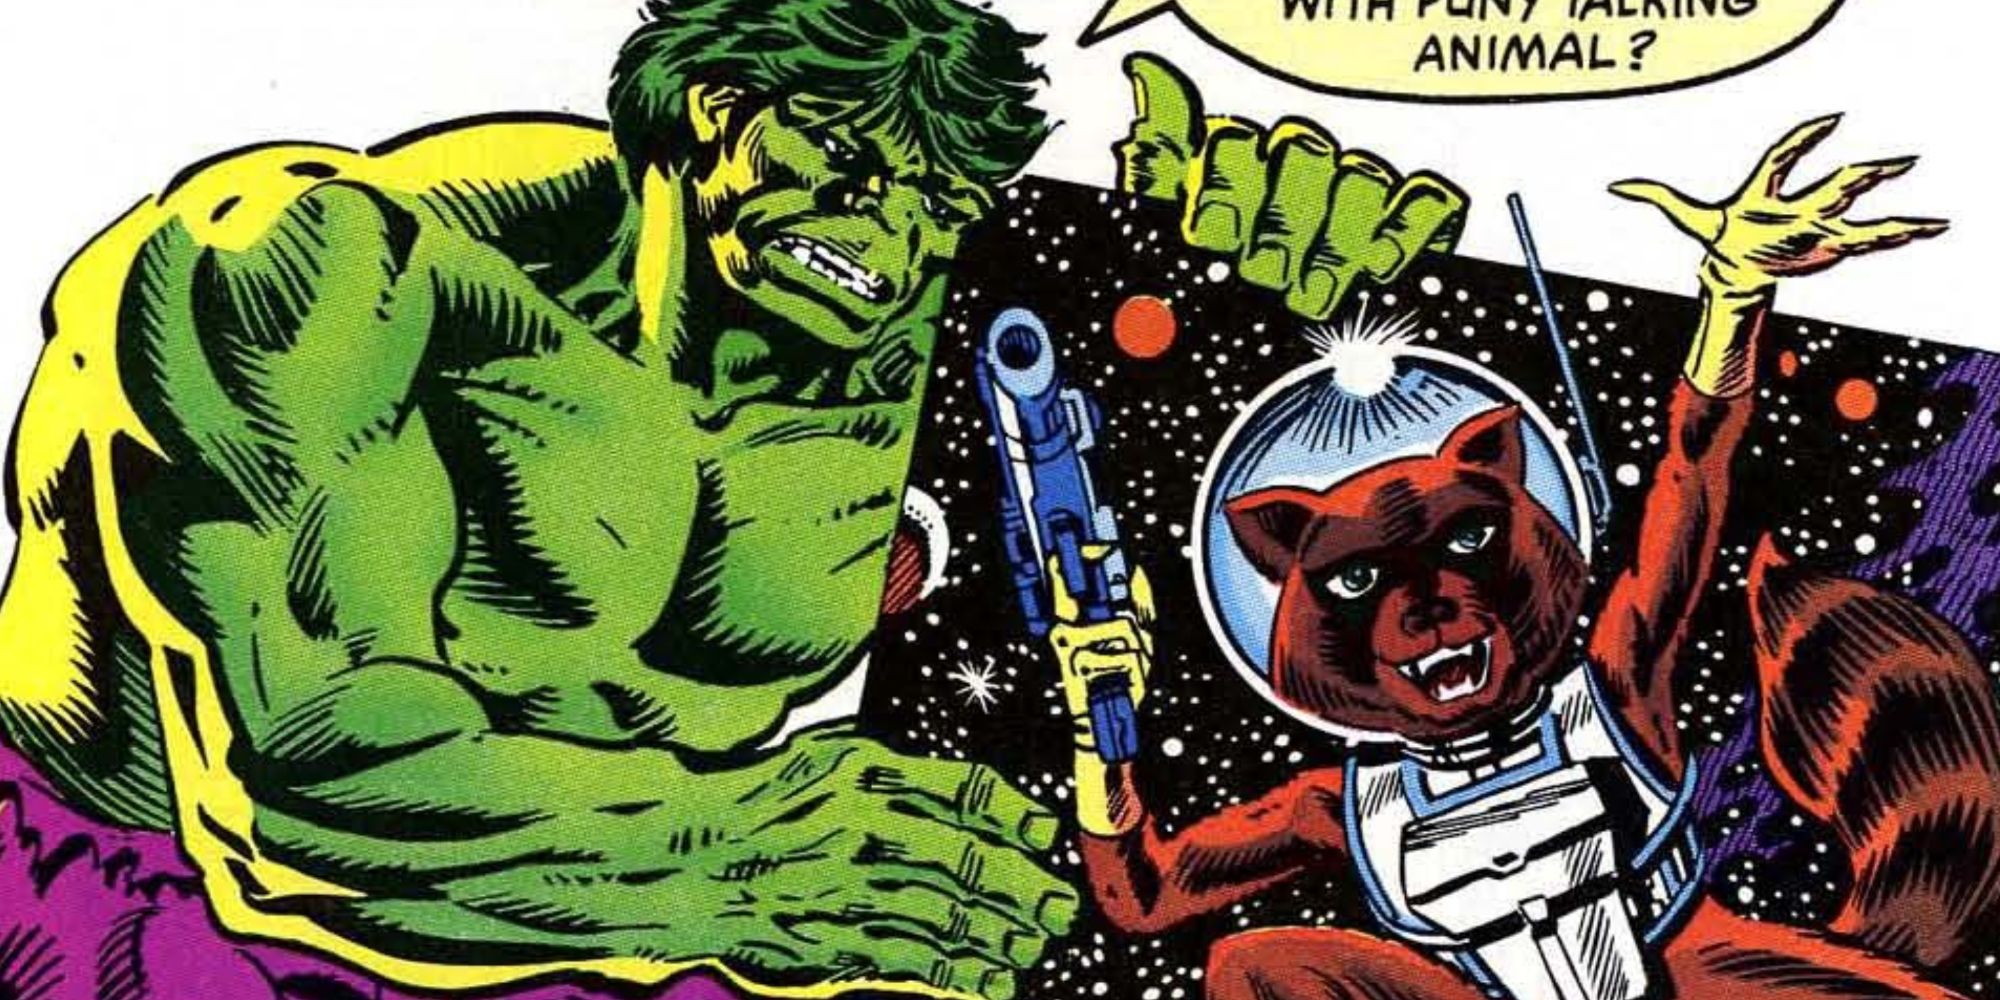 The Hulk and Rocket Raccoon appear in Marvel Comics.